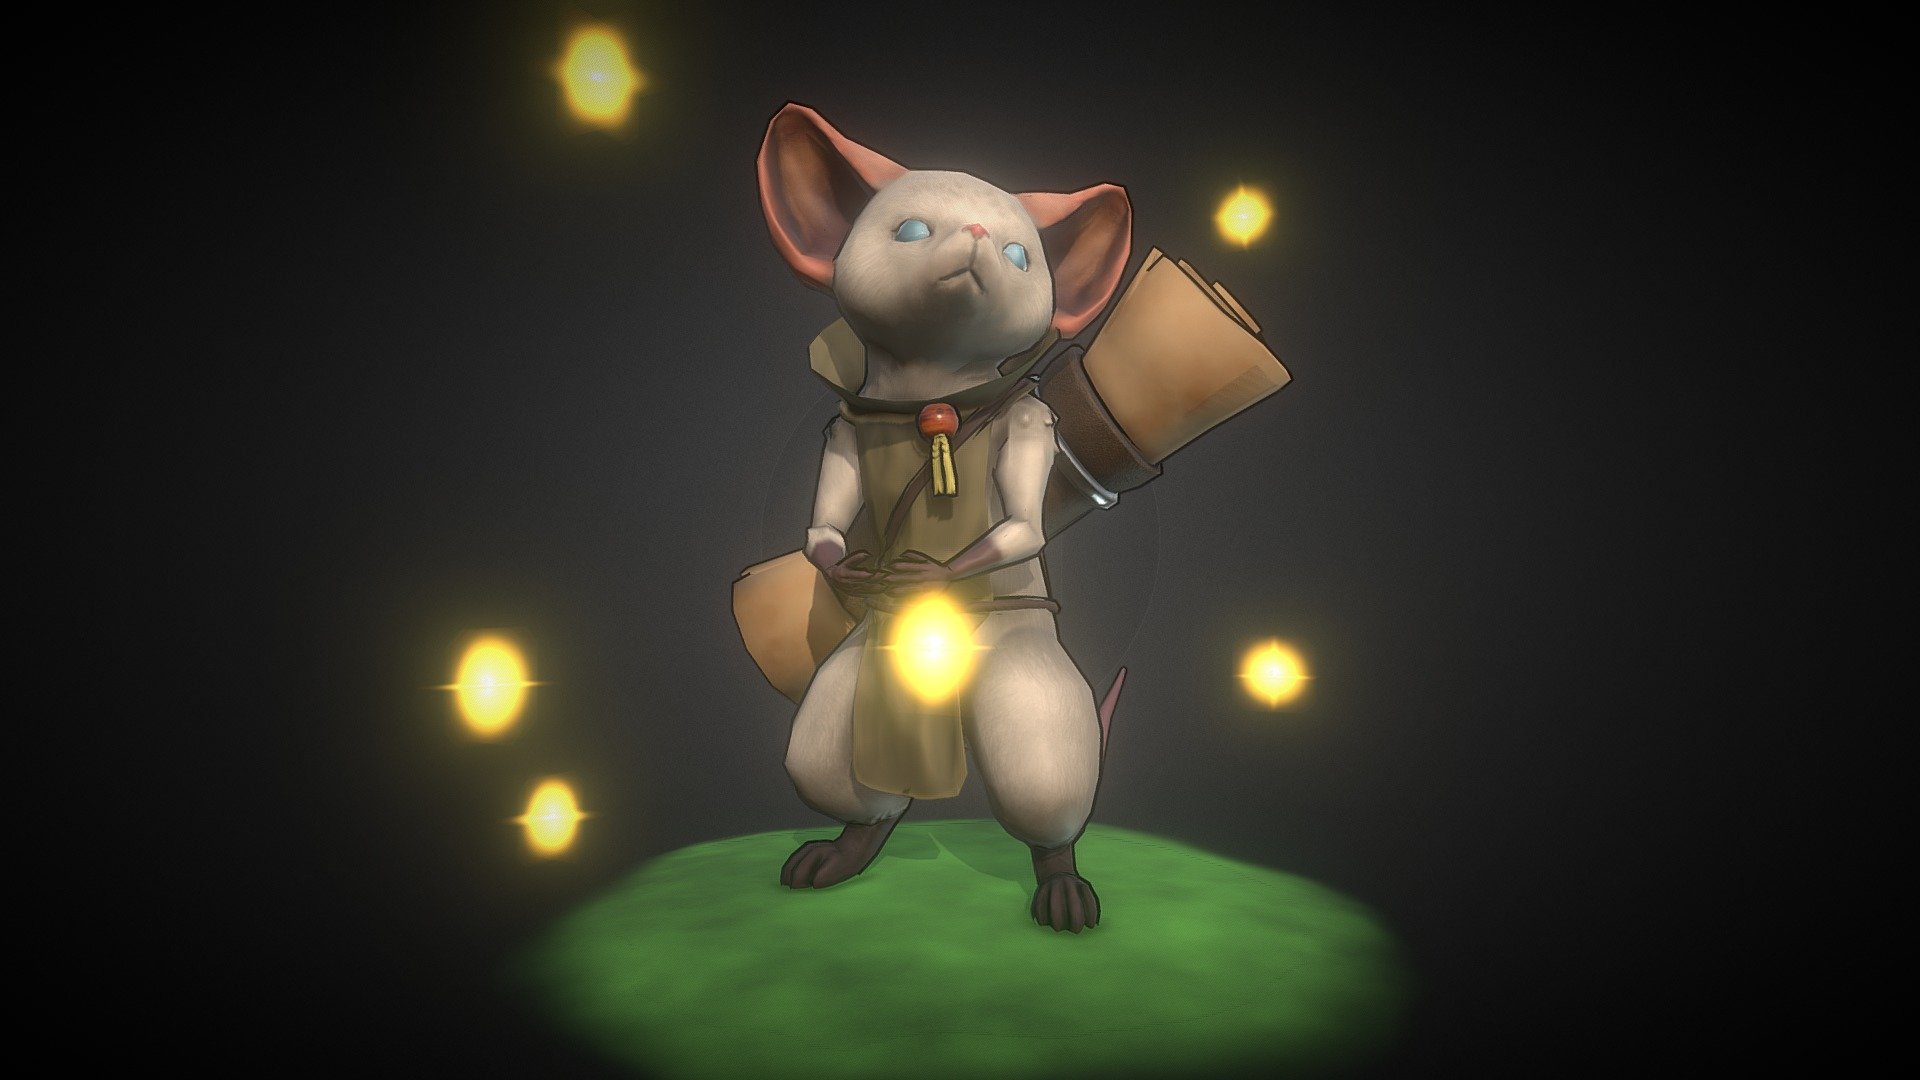 I found this nice concept art of mouse and i really wanted to made 3D model of it.
Here is link to Image: https://ovopack.tumblr.com/post/182584894290/mouse-week
I hope you will like my model of this great character! - Mouse Model by Sebastian Kowalik - 3D model by Sebastian Kowalik (@okamino) 3d model